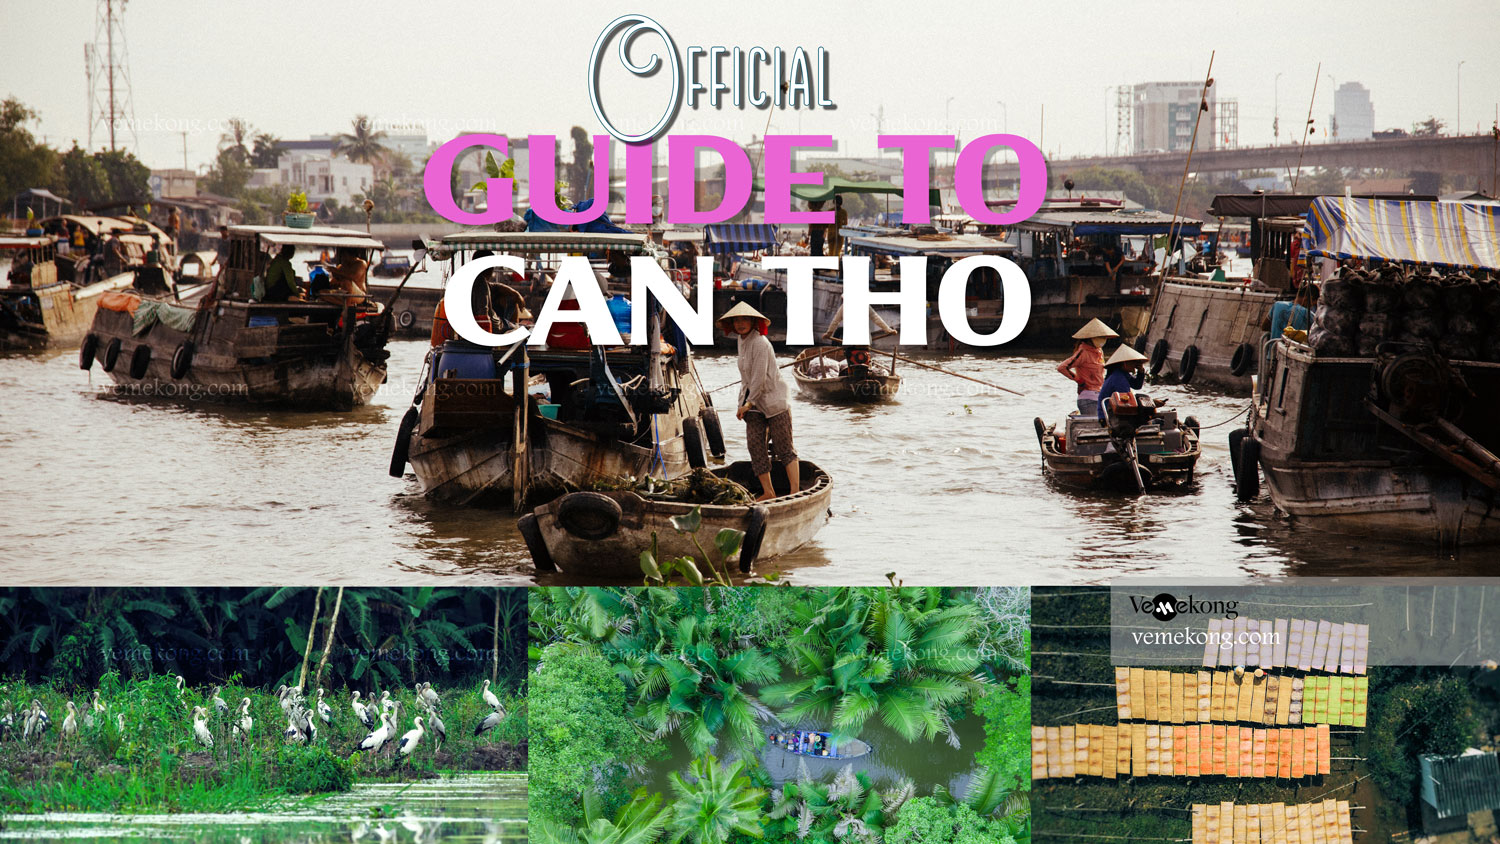 Visit Can Tho – Official Can Tho Travel Guide